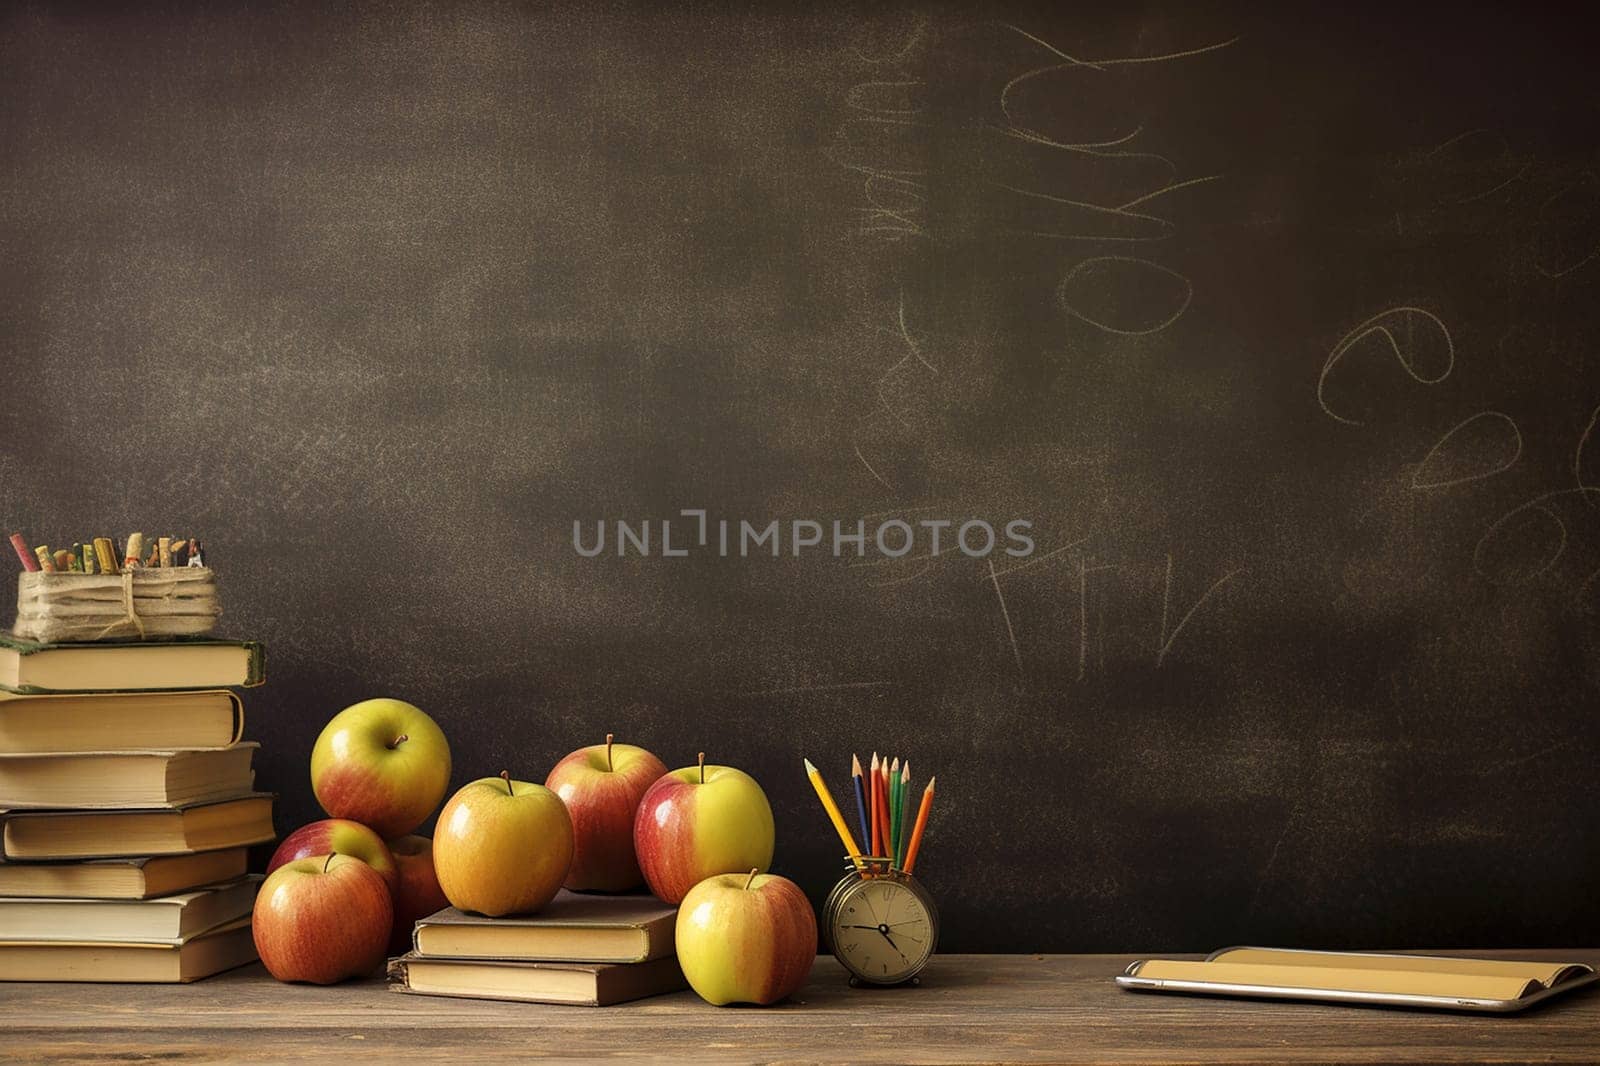 A Still Life of Education: Apples and Books Against a Chalkboard by Hype2art